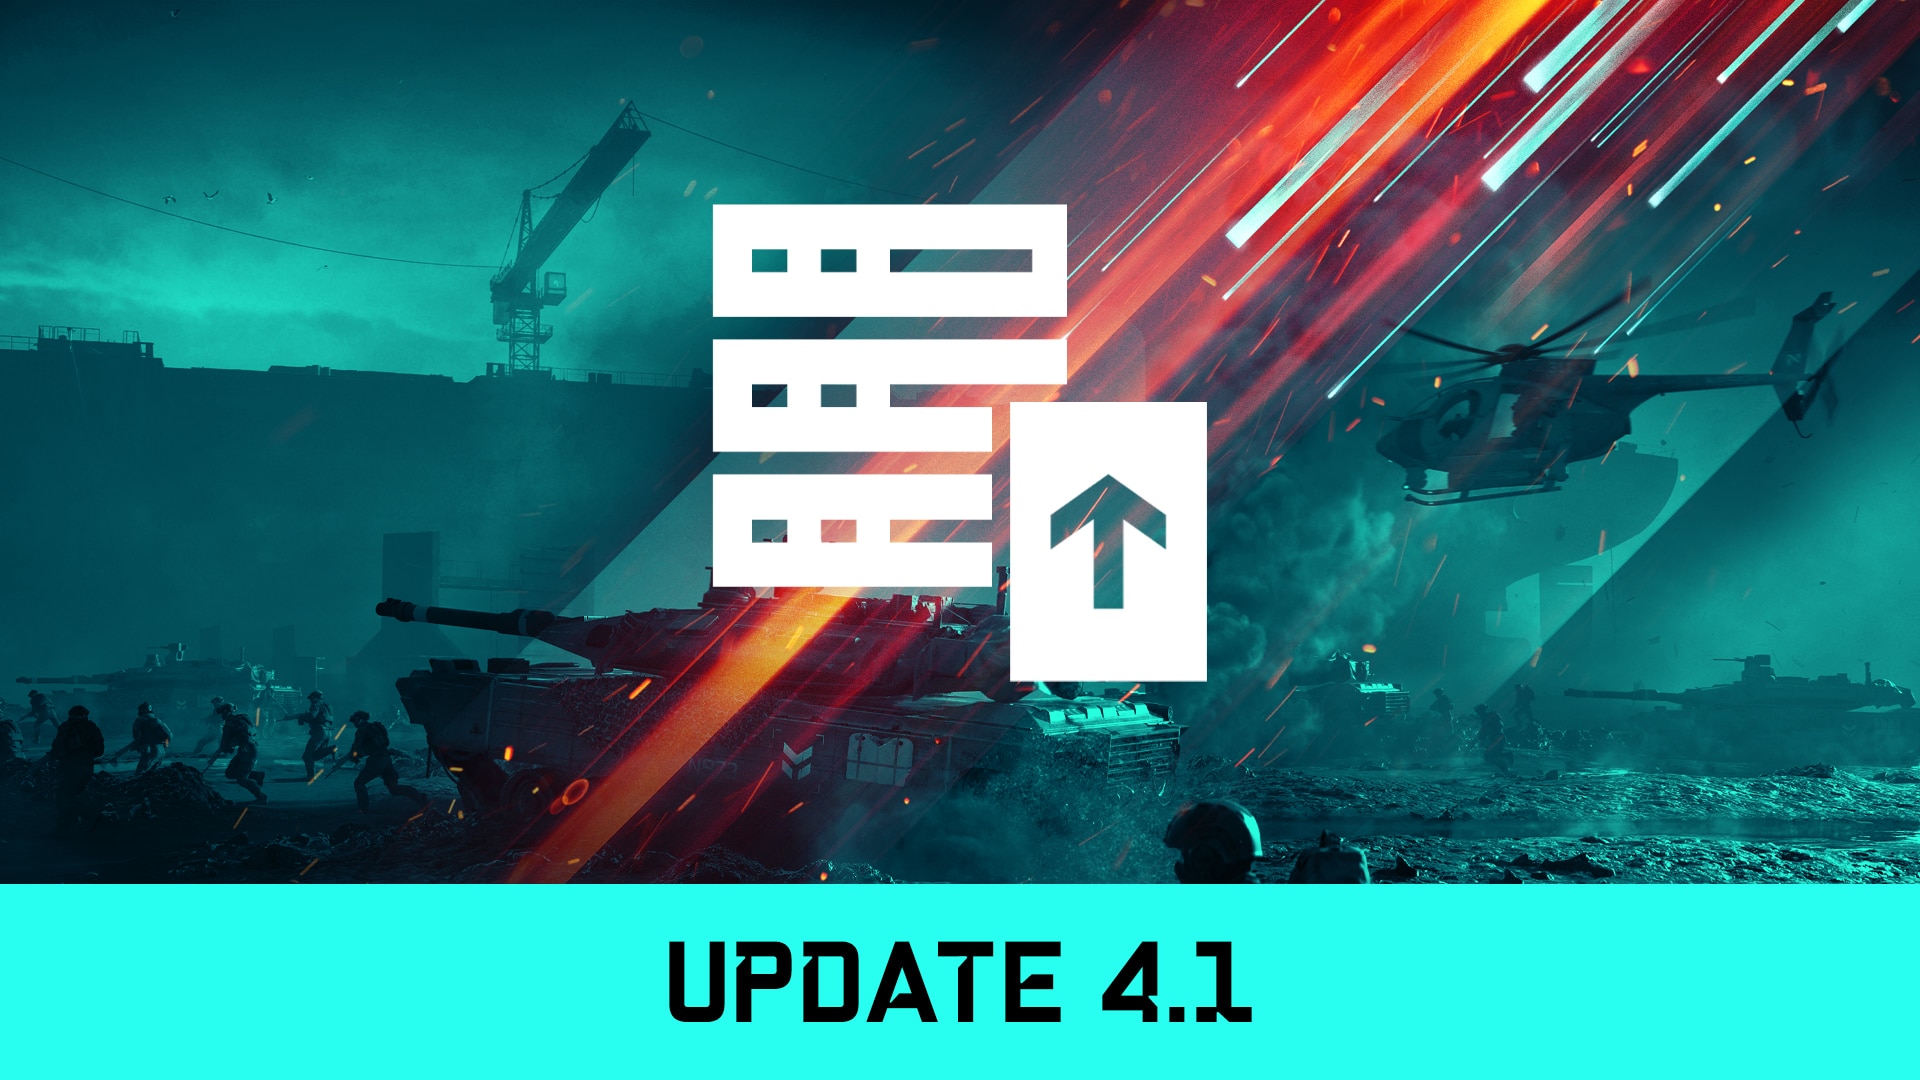 Battlefield 2042 Update 1.11 Fires Out for Patch 4.1 This May 19